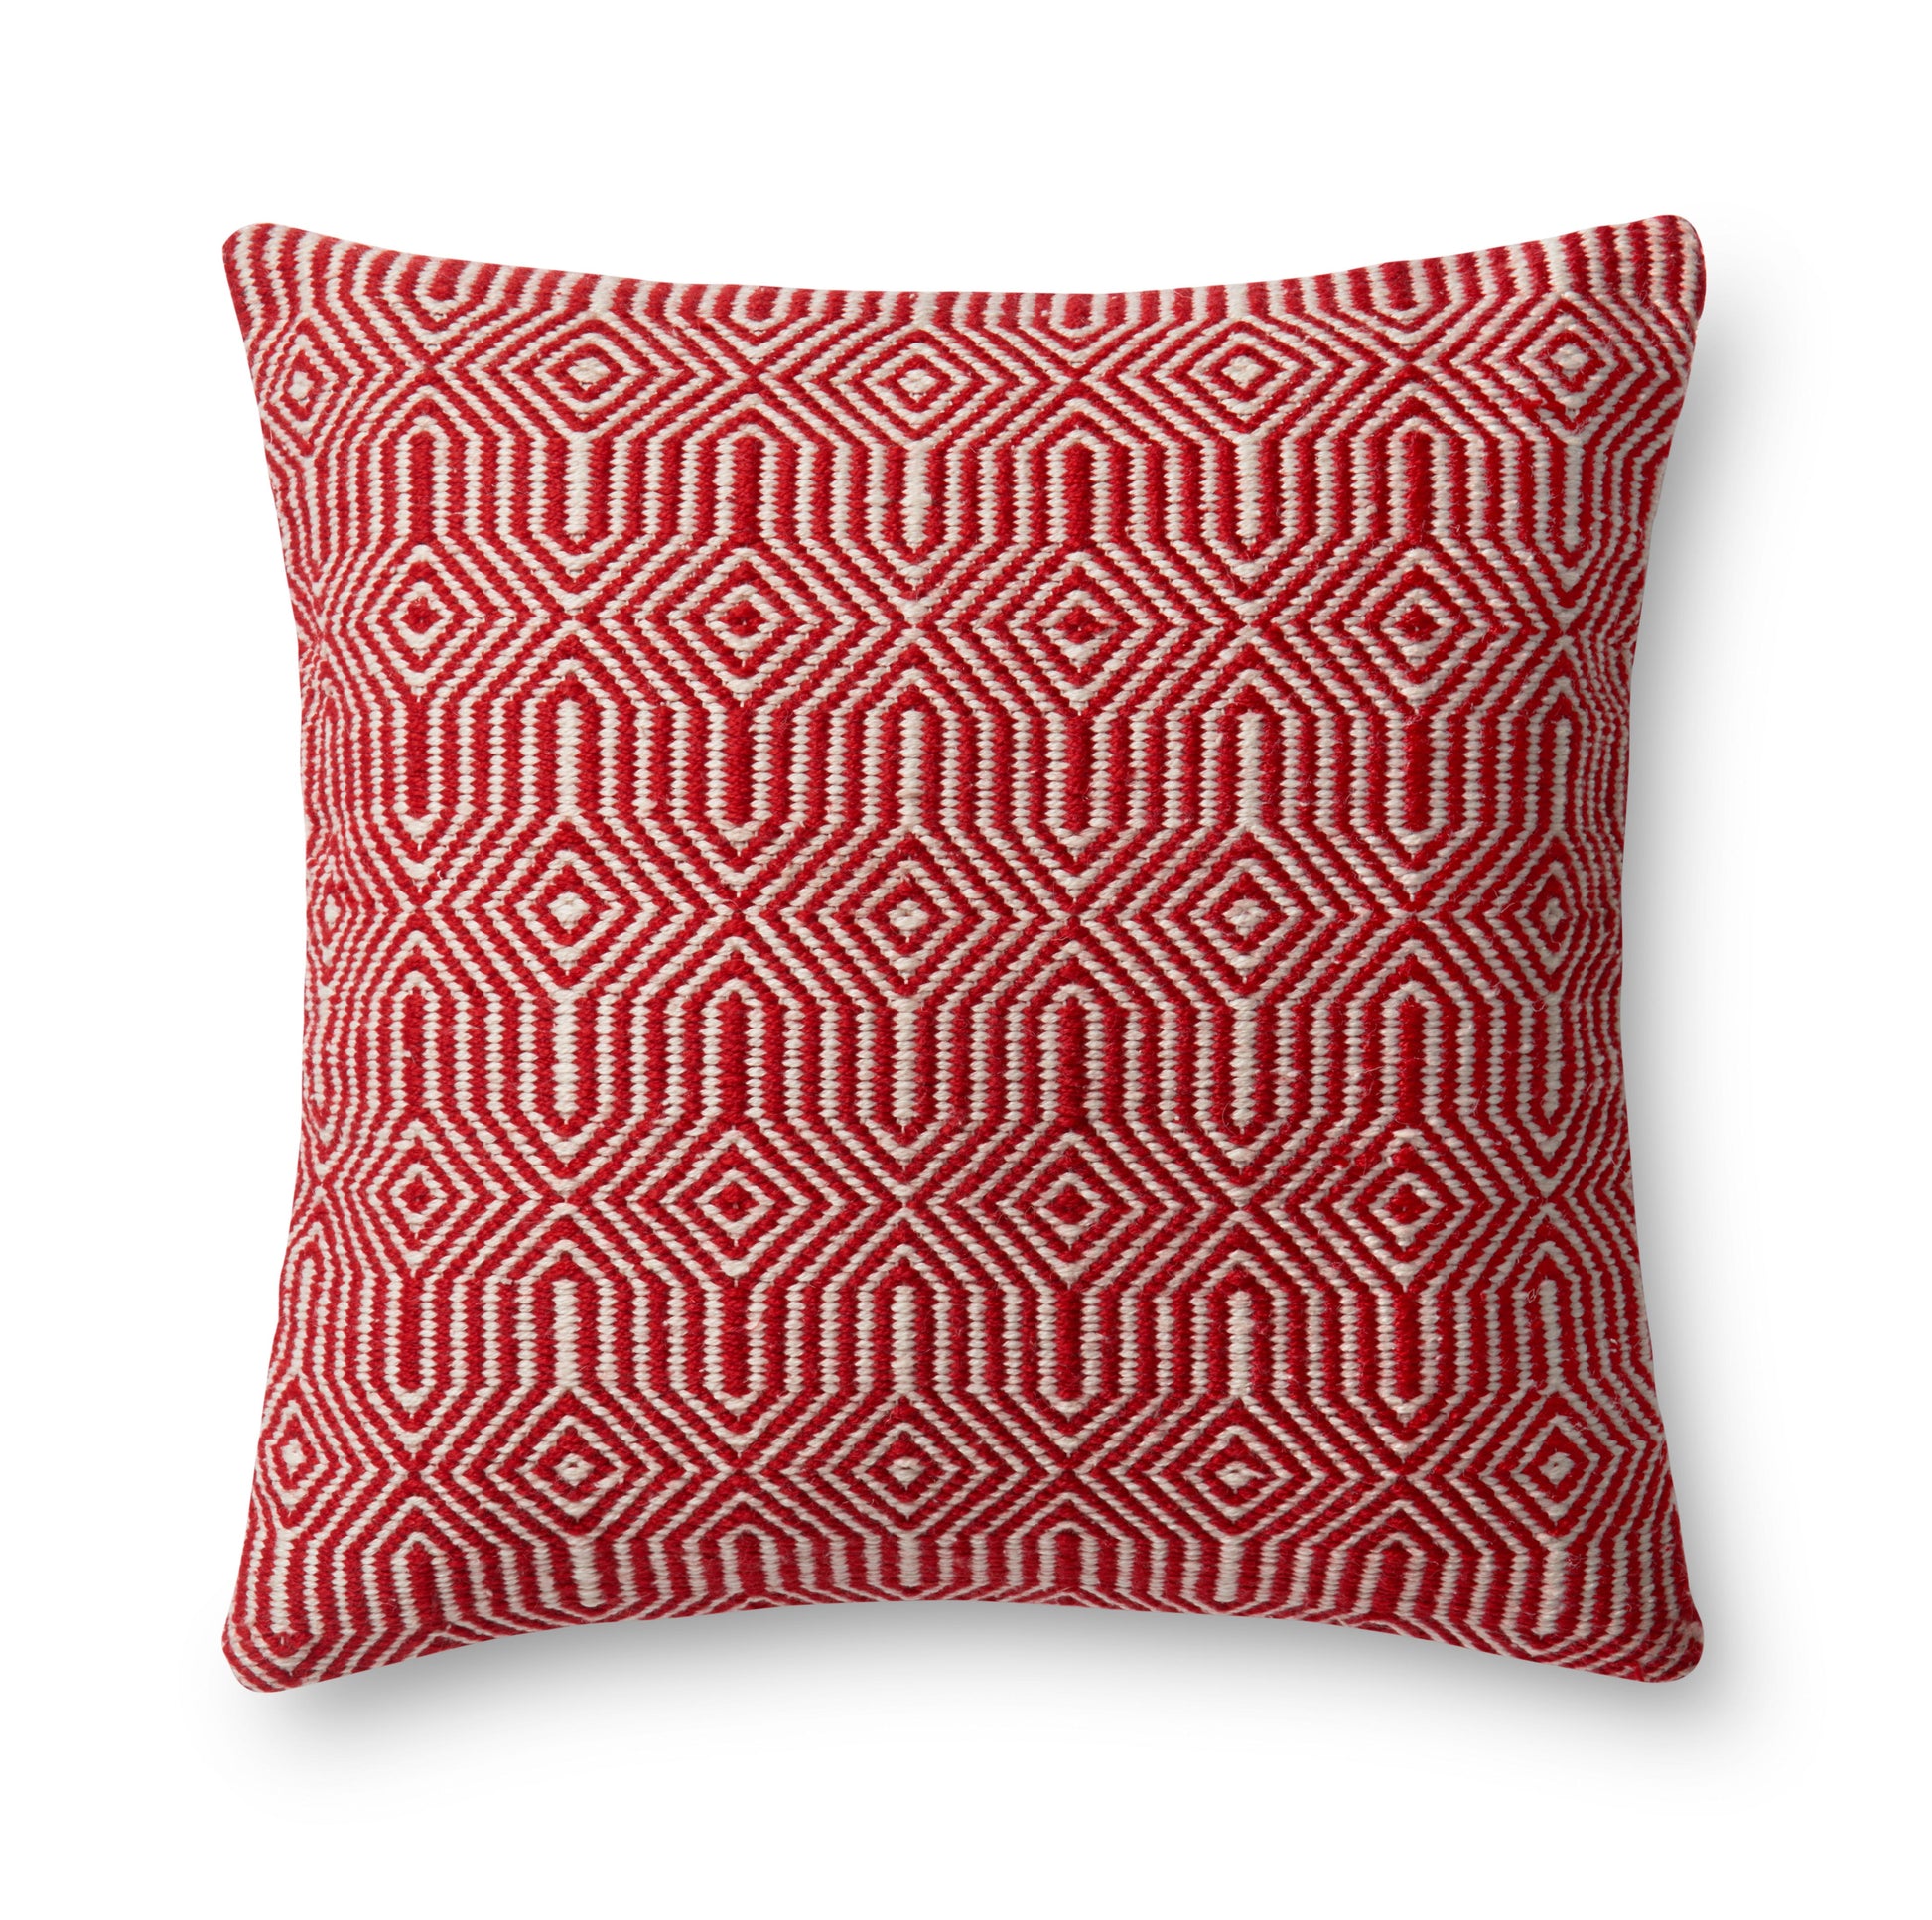 Photo of a pillow;  P0339 Red / Ivory 22" x 22" Cover w/Poly Pillow